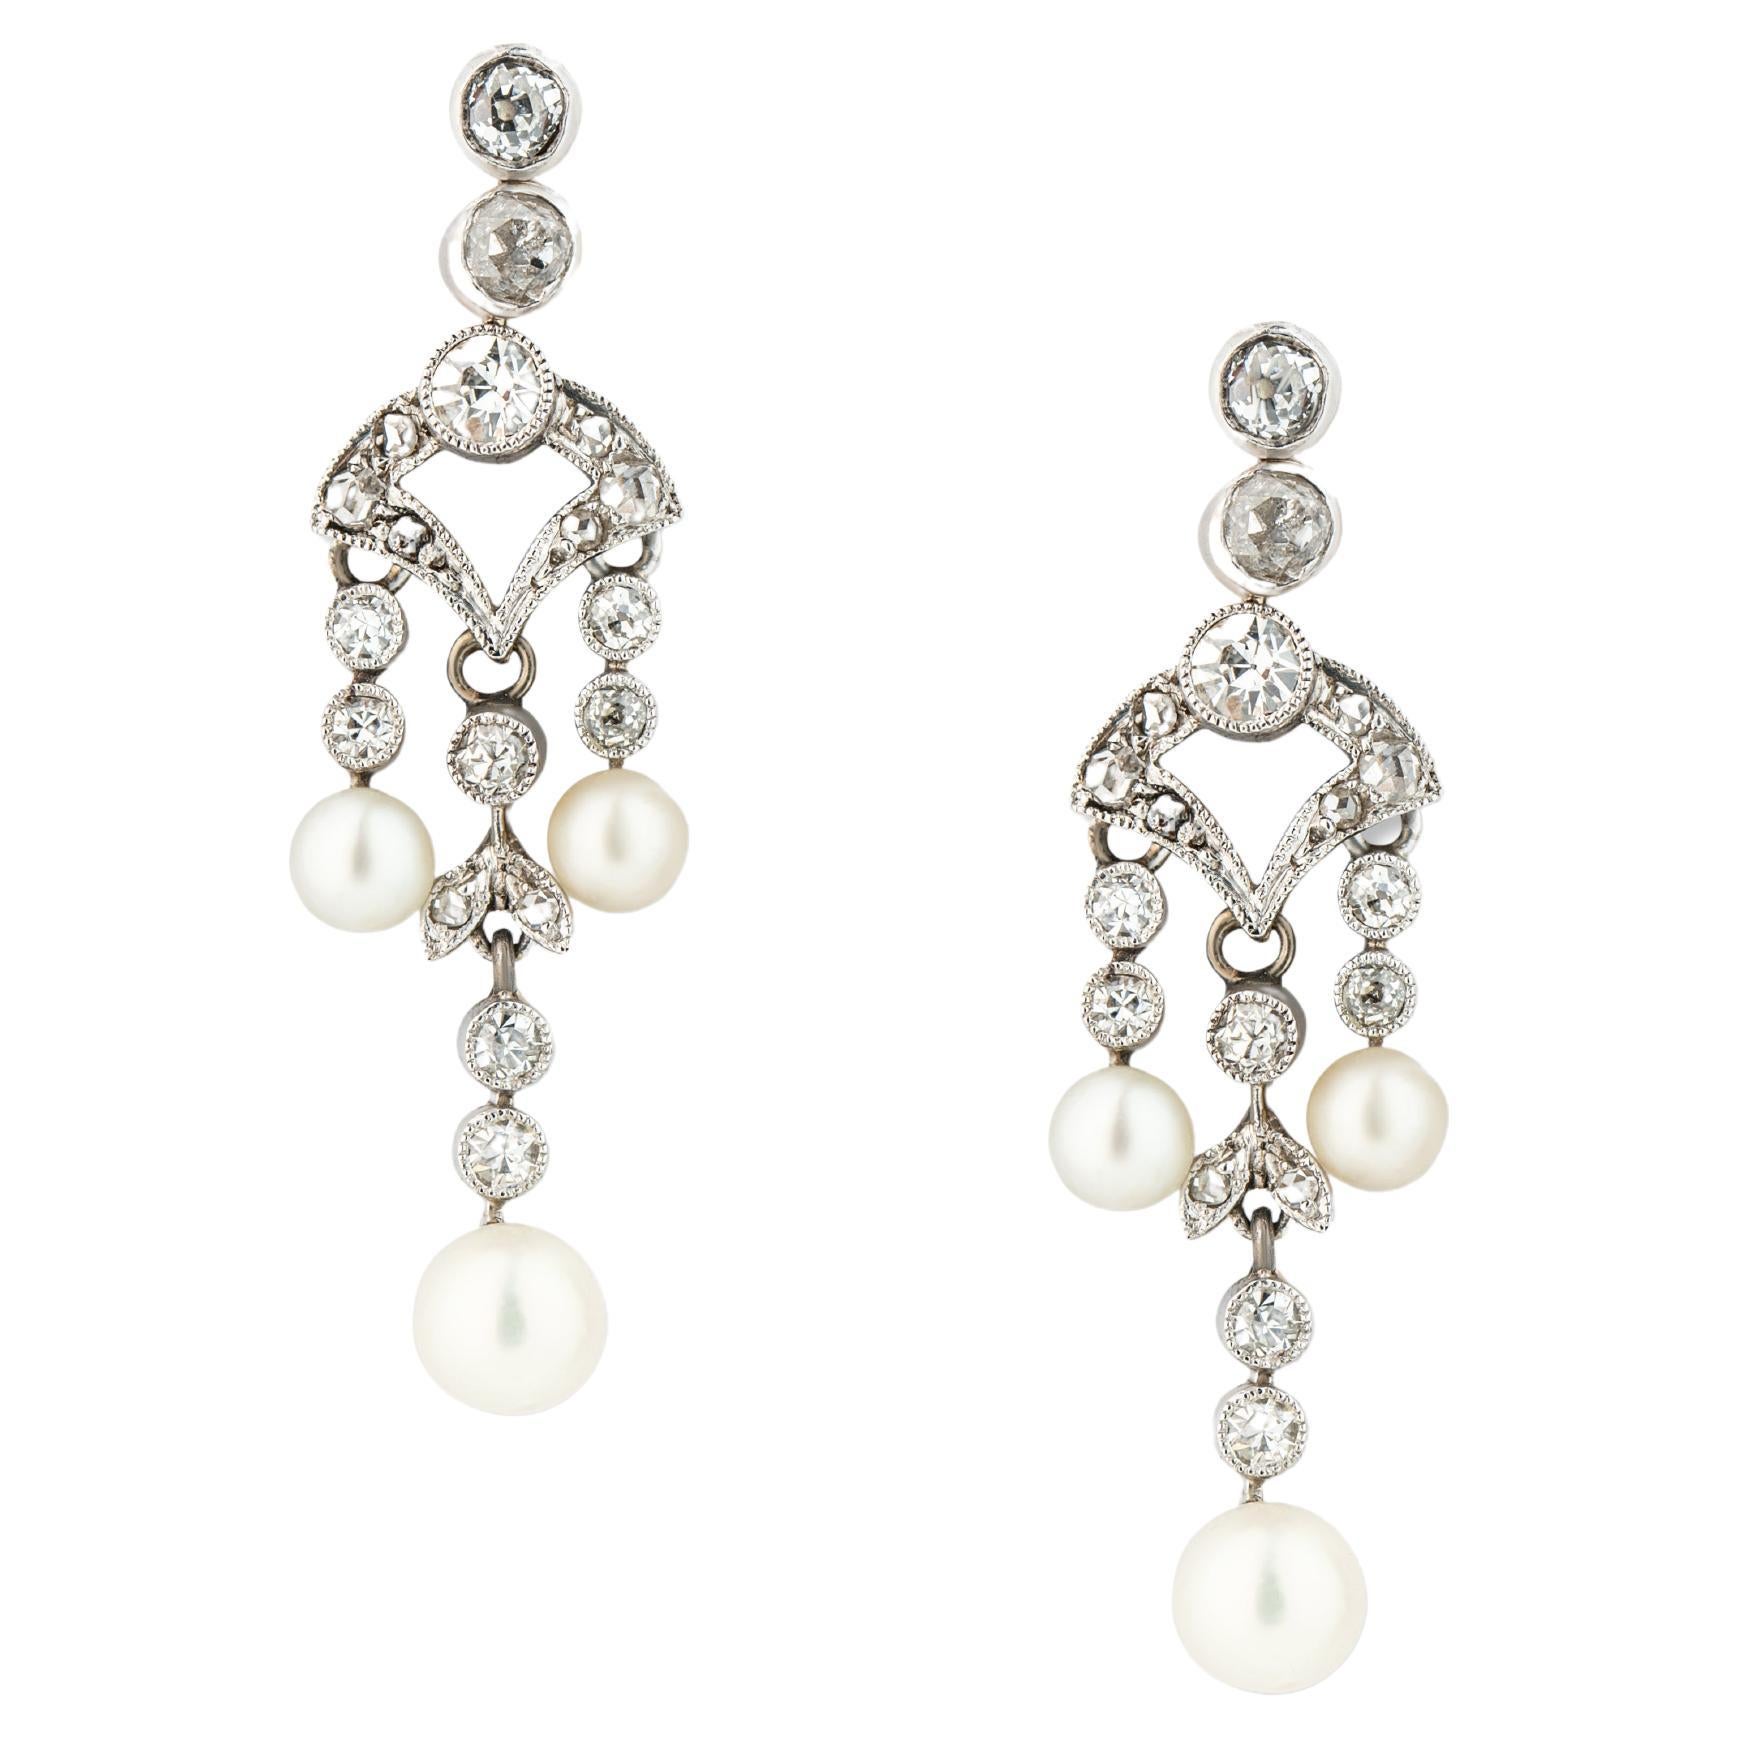 Earrings White Gold Diamonds Seed Pearls Edwardian ca. 1910 For Sale